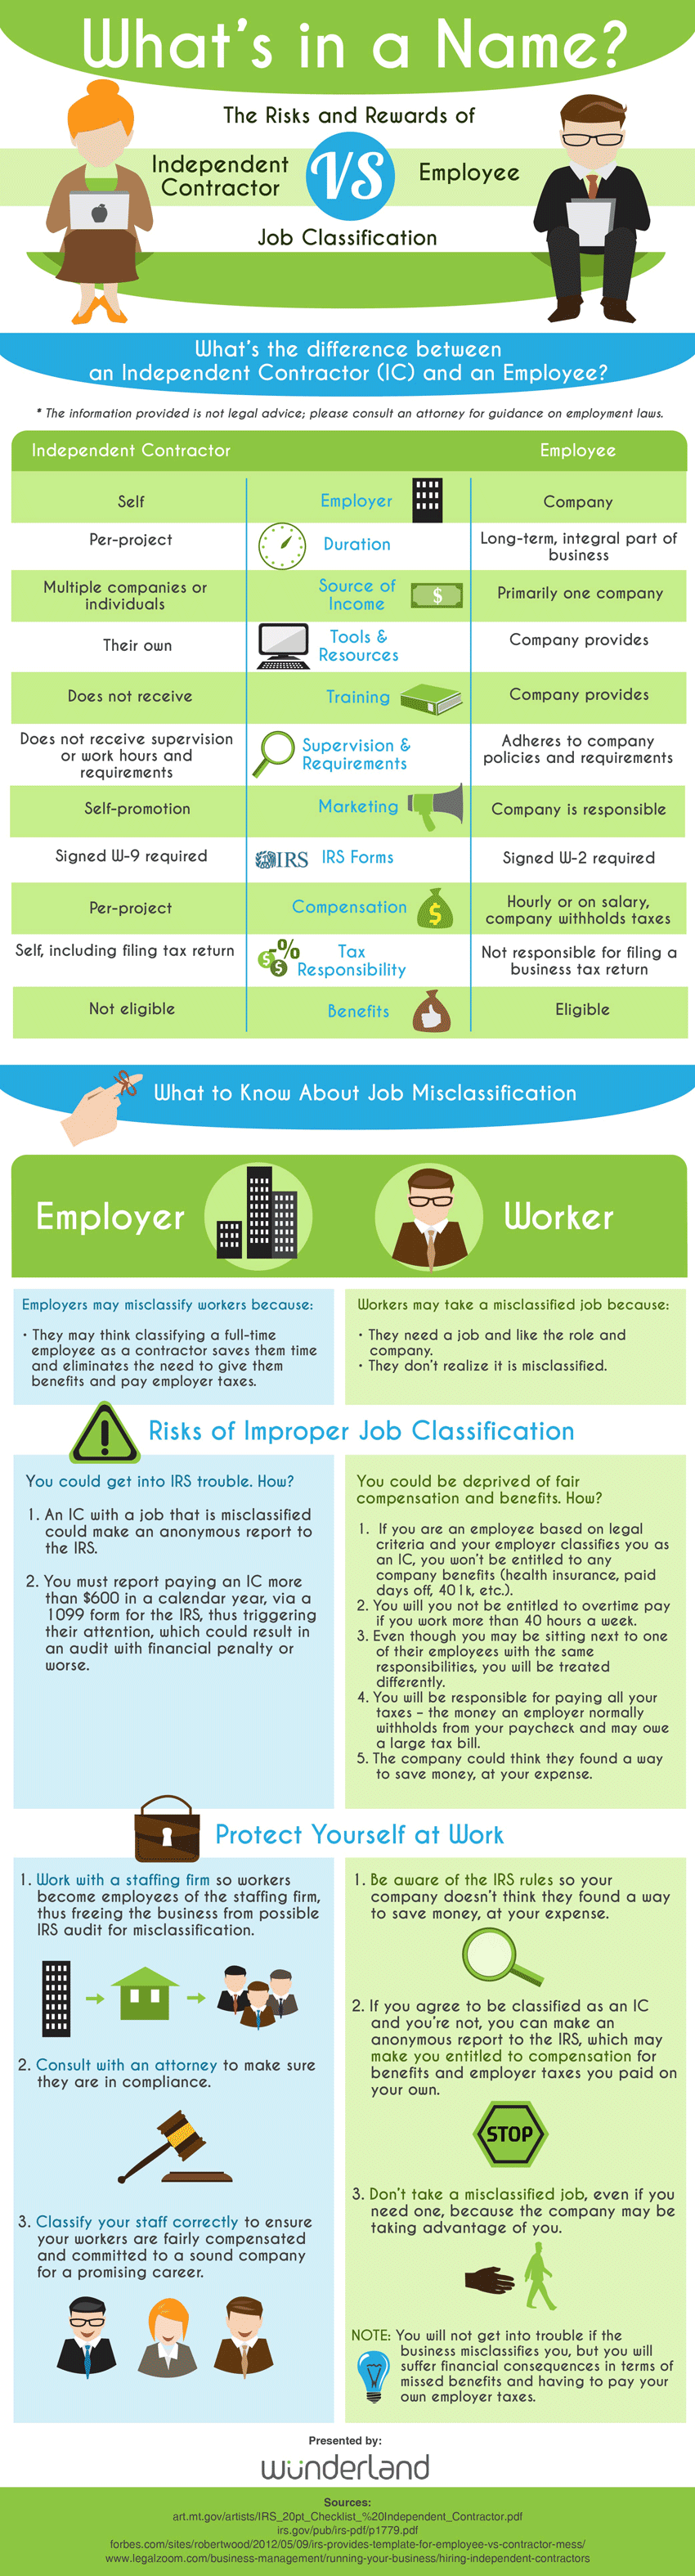 Employee classification infographic by Wunderland